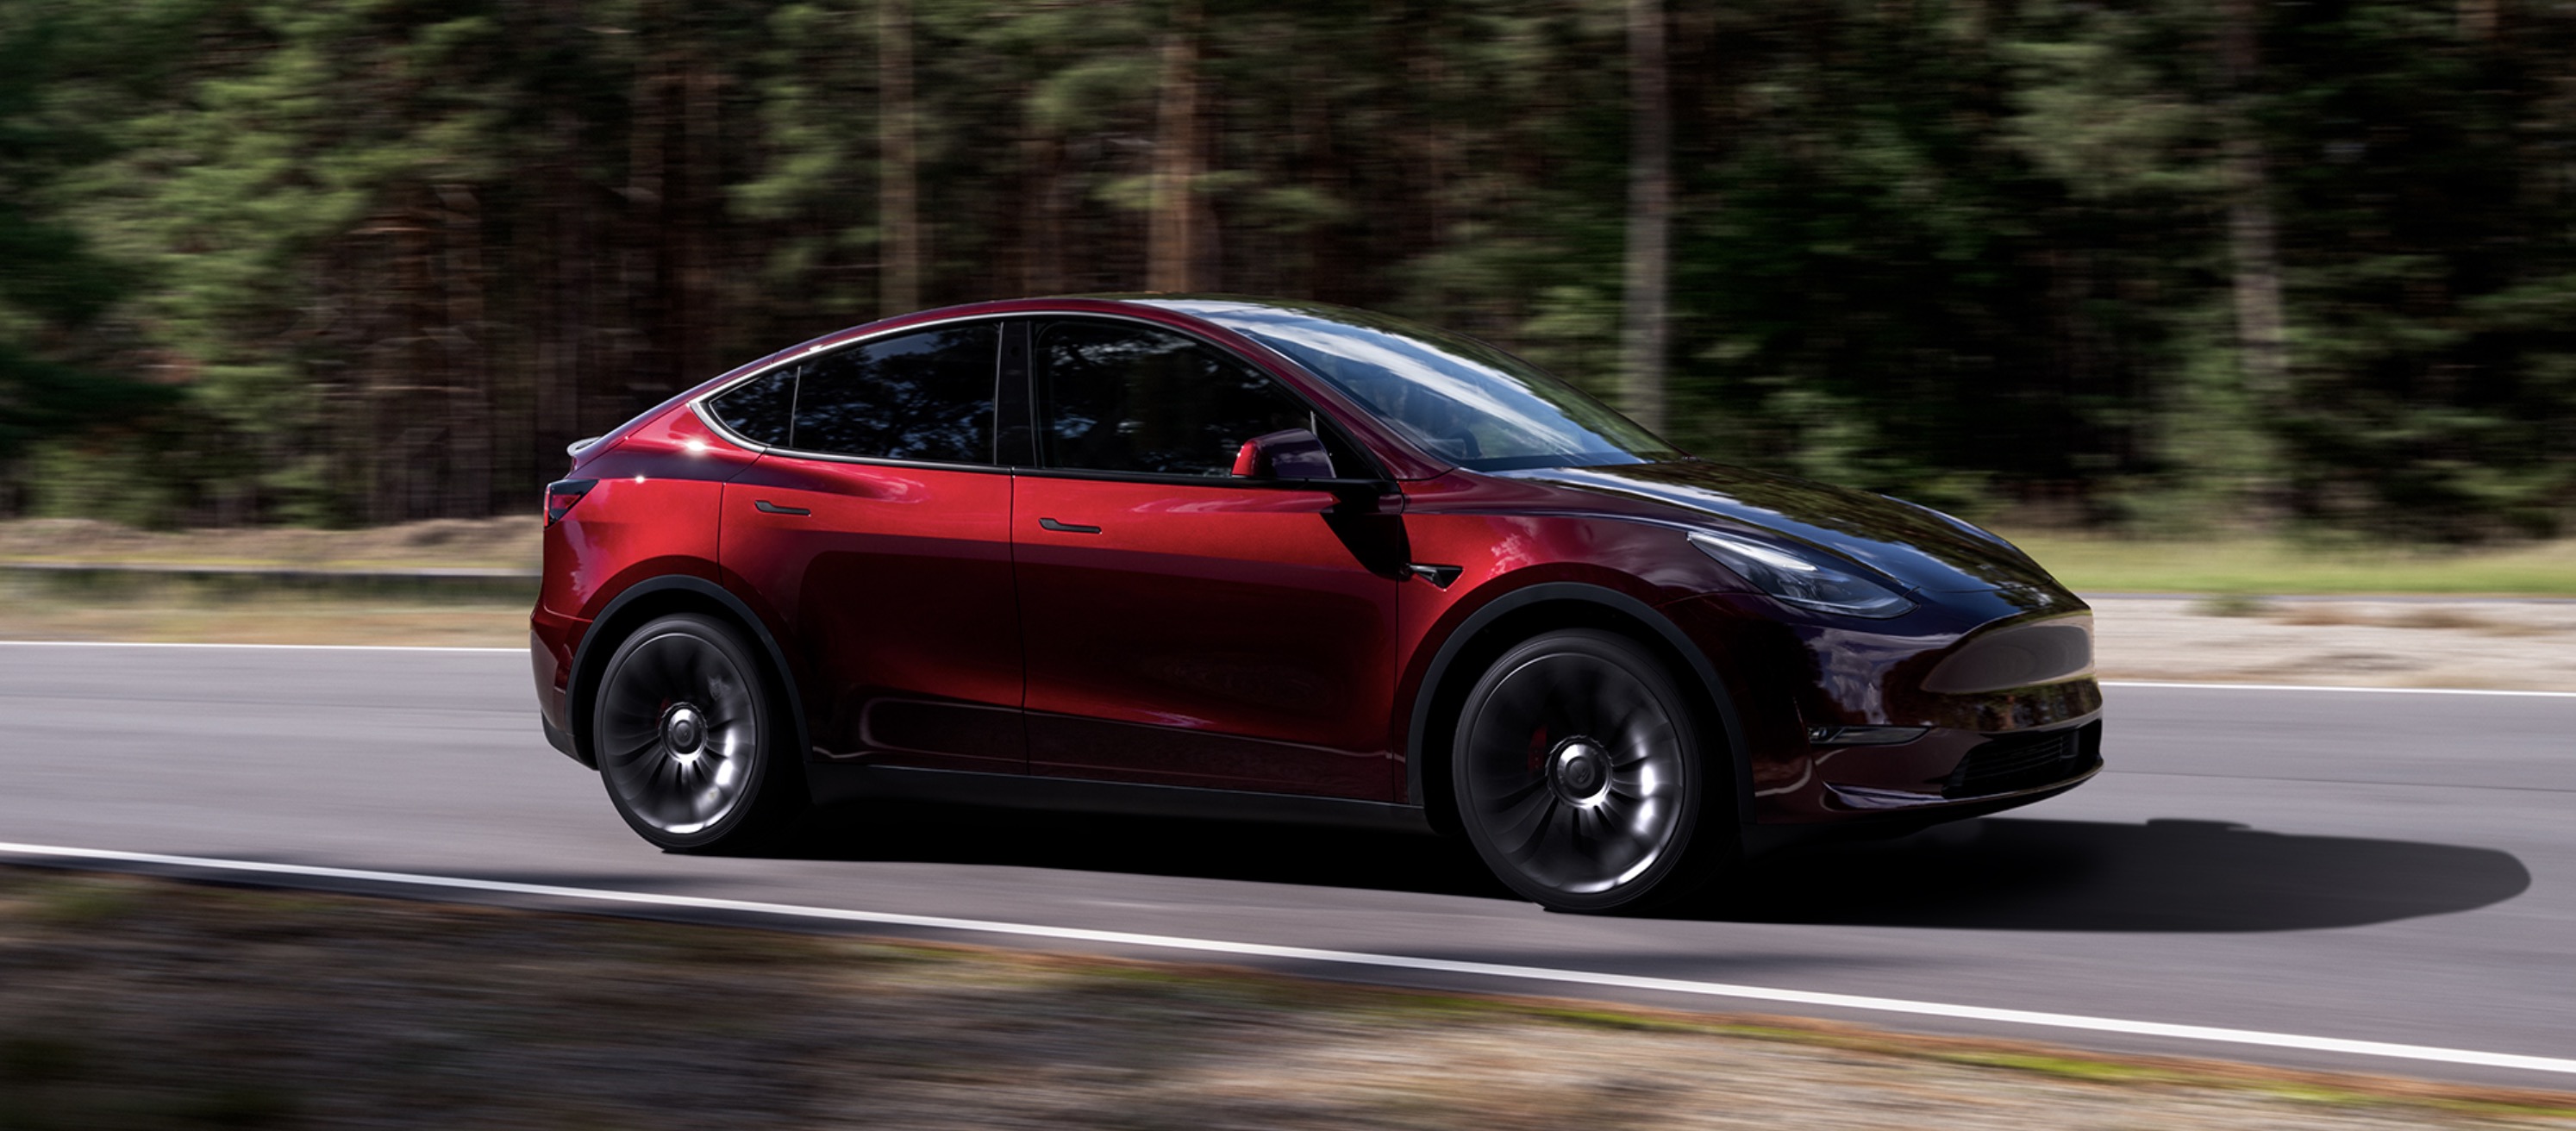 New Tesla Model Y with BYD batteries charges much faster